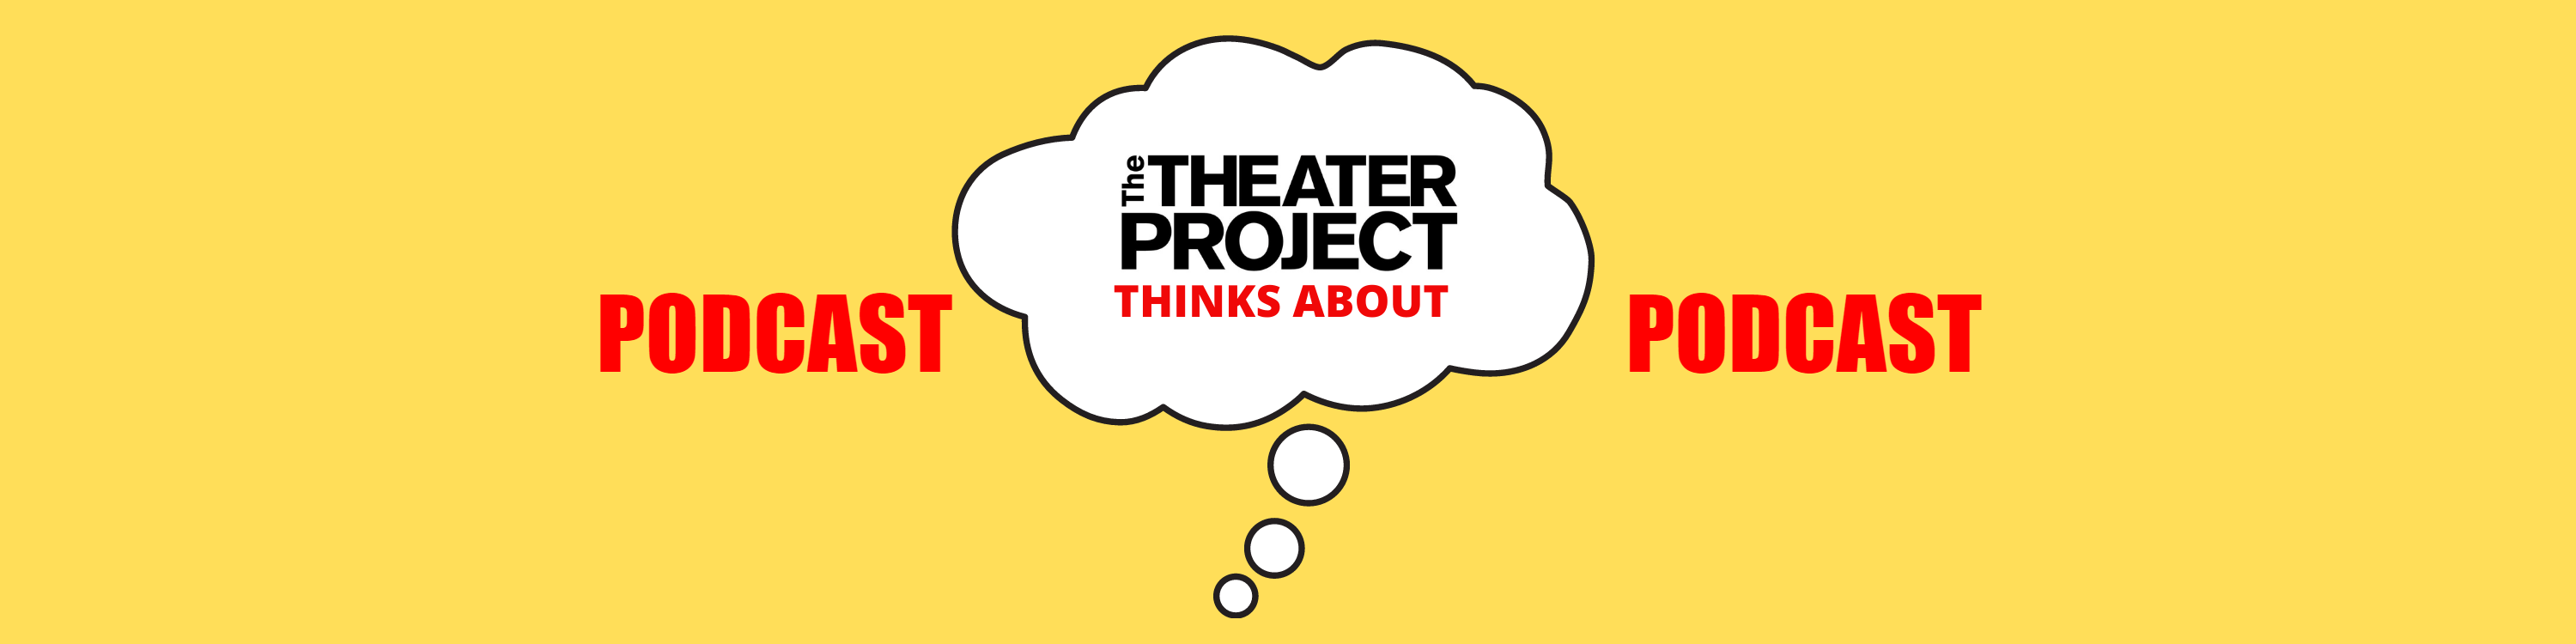 PODCAST: The Theater Project Thinks About ...
   